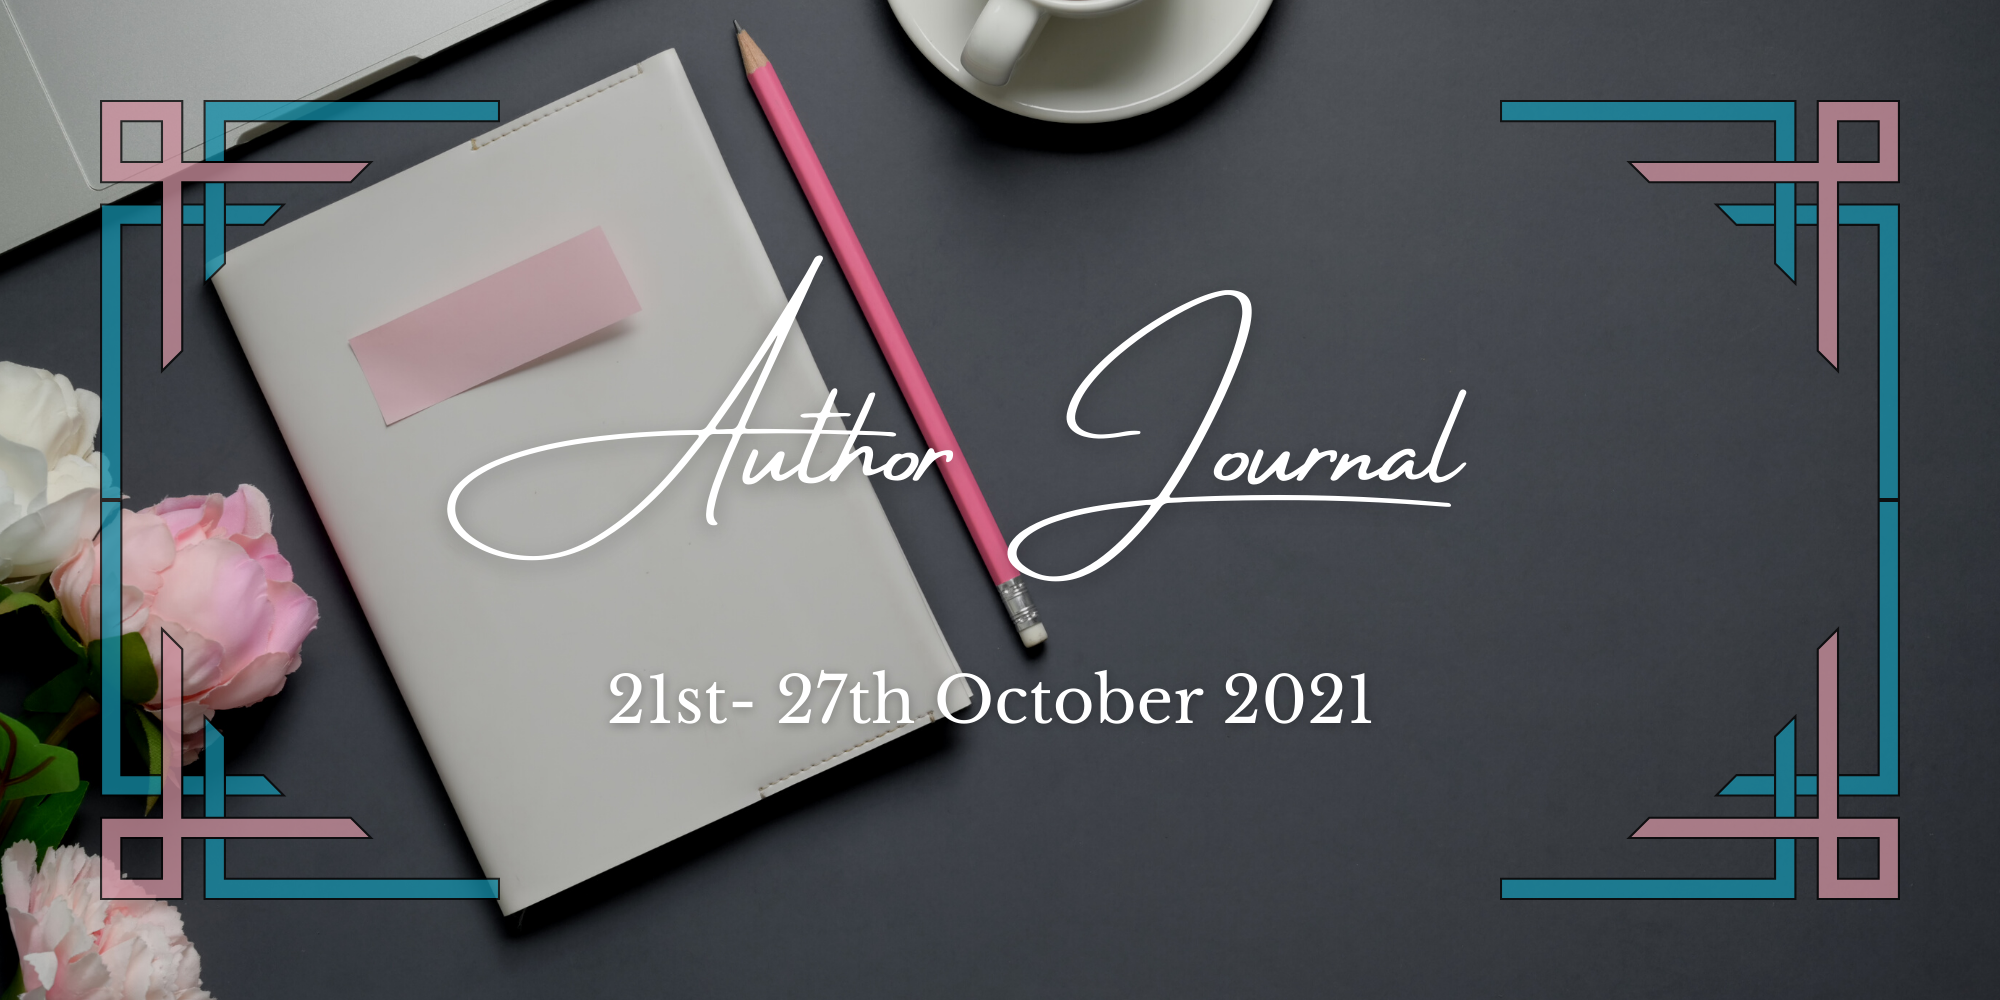 Author Journal 21st – 27th October 2021